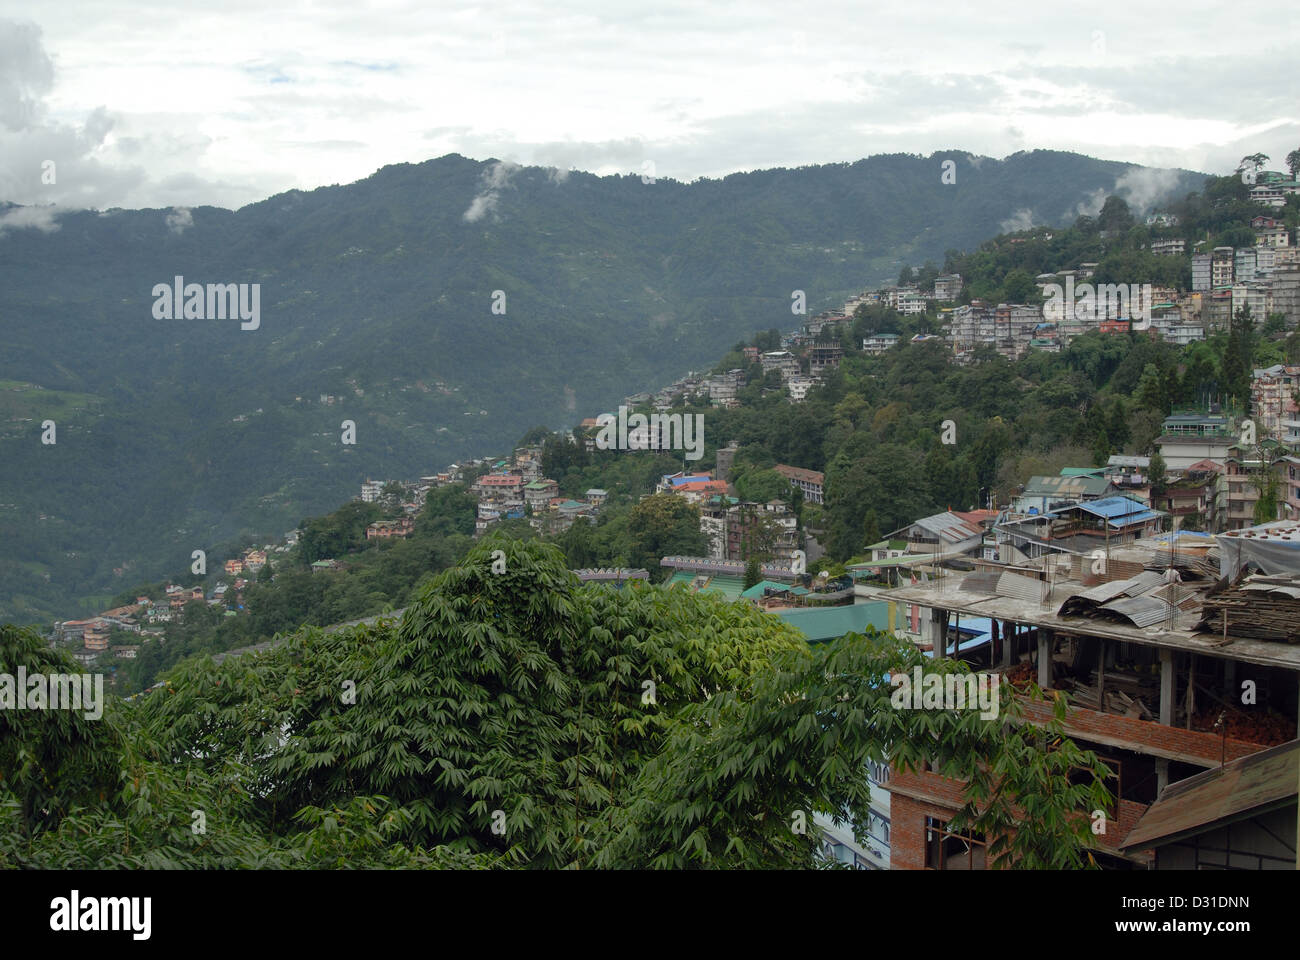 General-View of one of the hills at Gangtok (Sikkim). Showing small houses on the slopes. Stock Photo